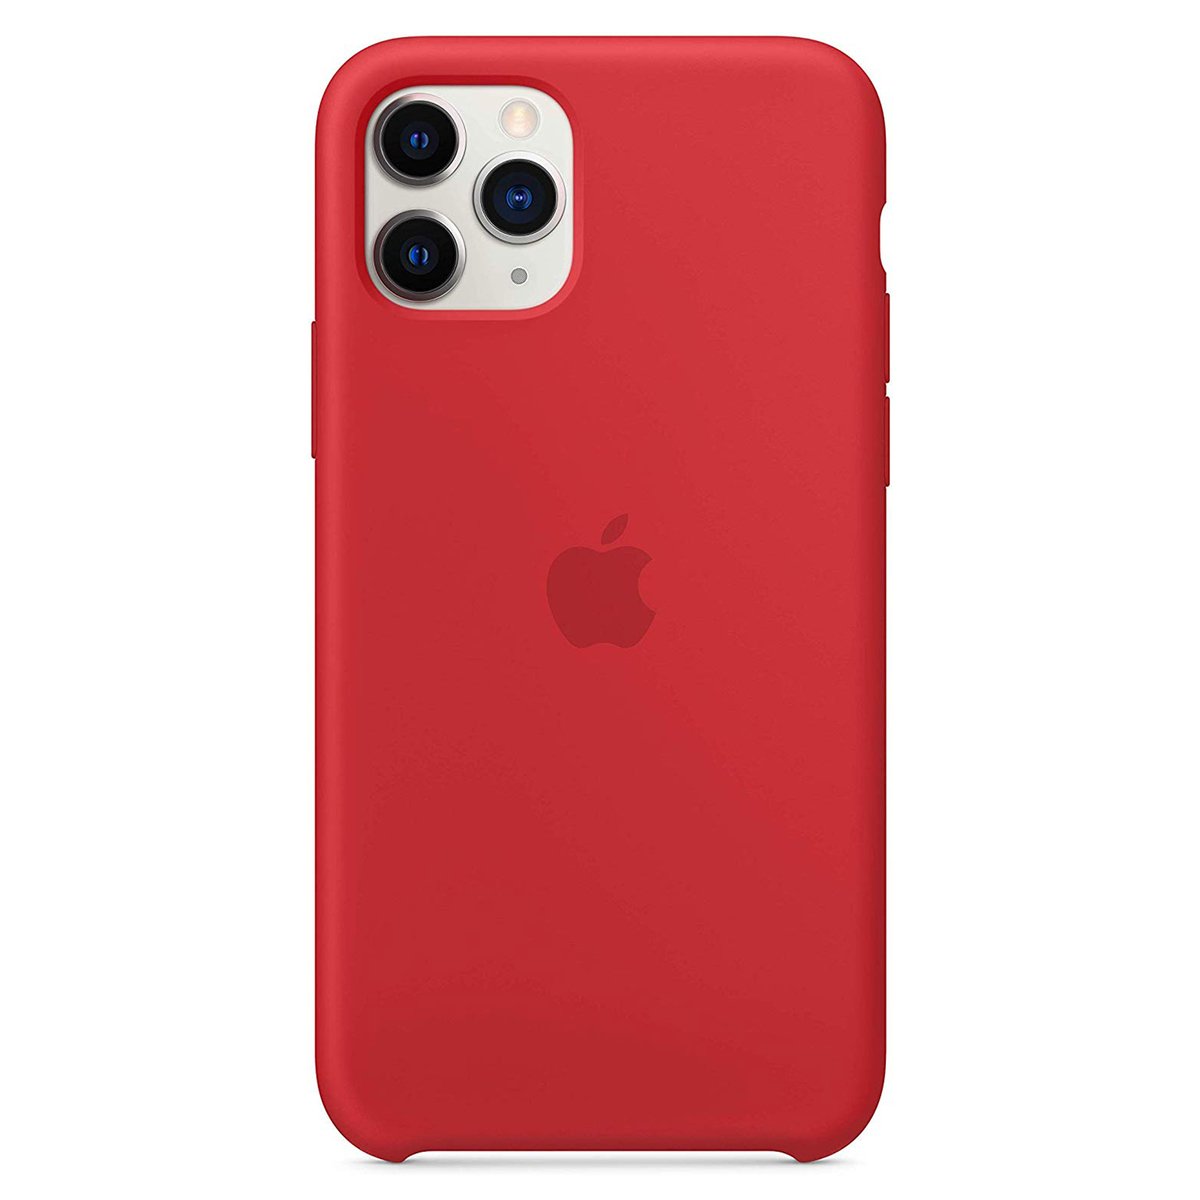 iPhone 11 Pro Silicone Case MWYH2ZM Red